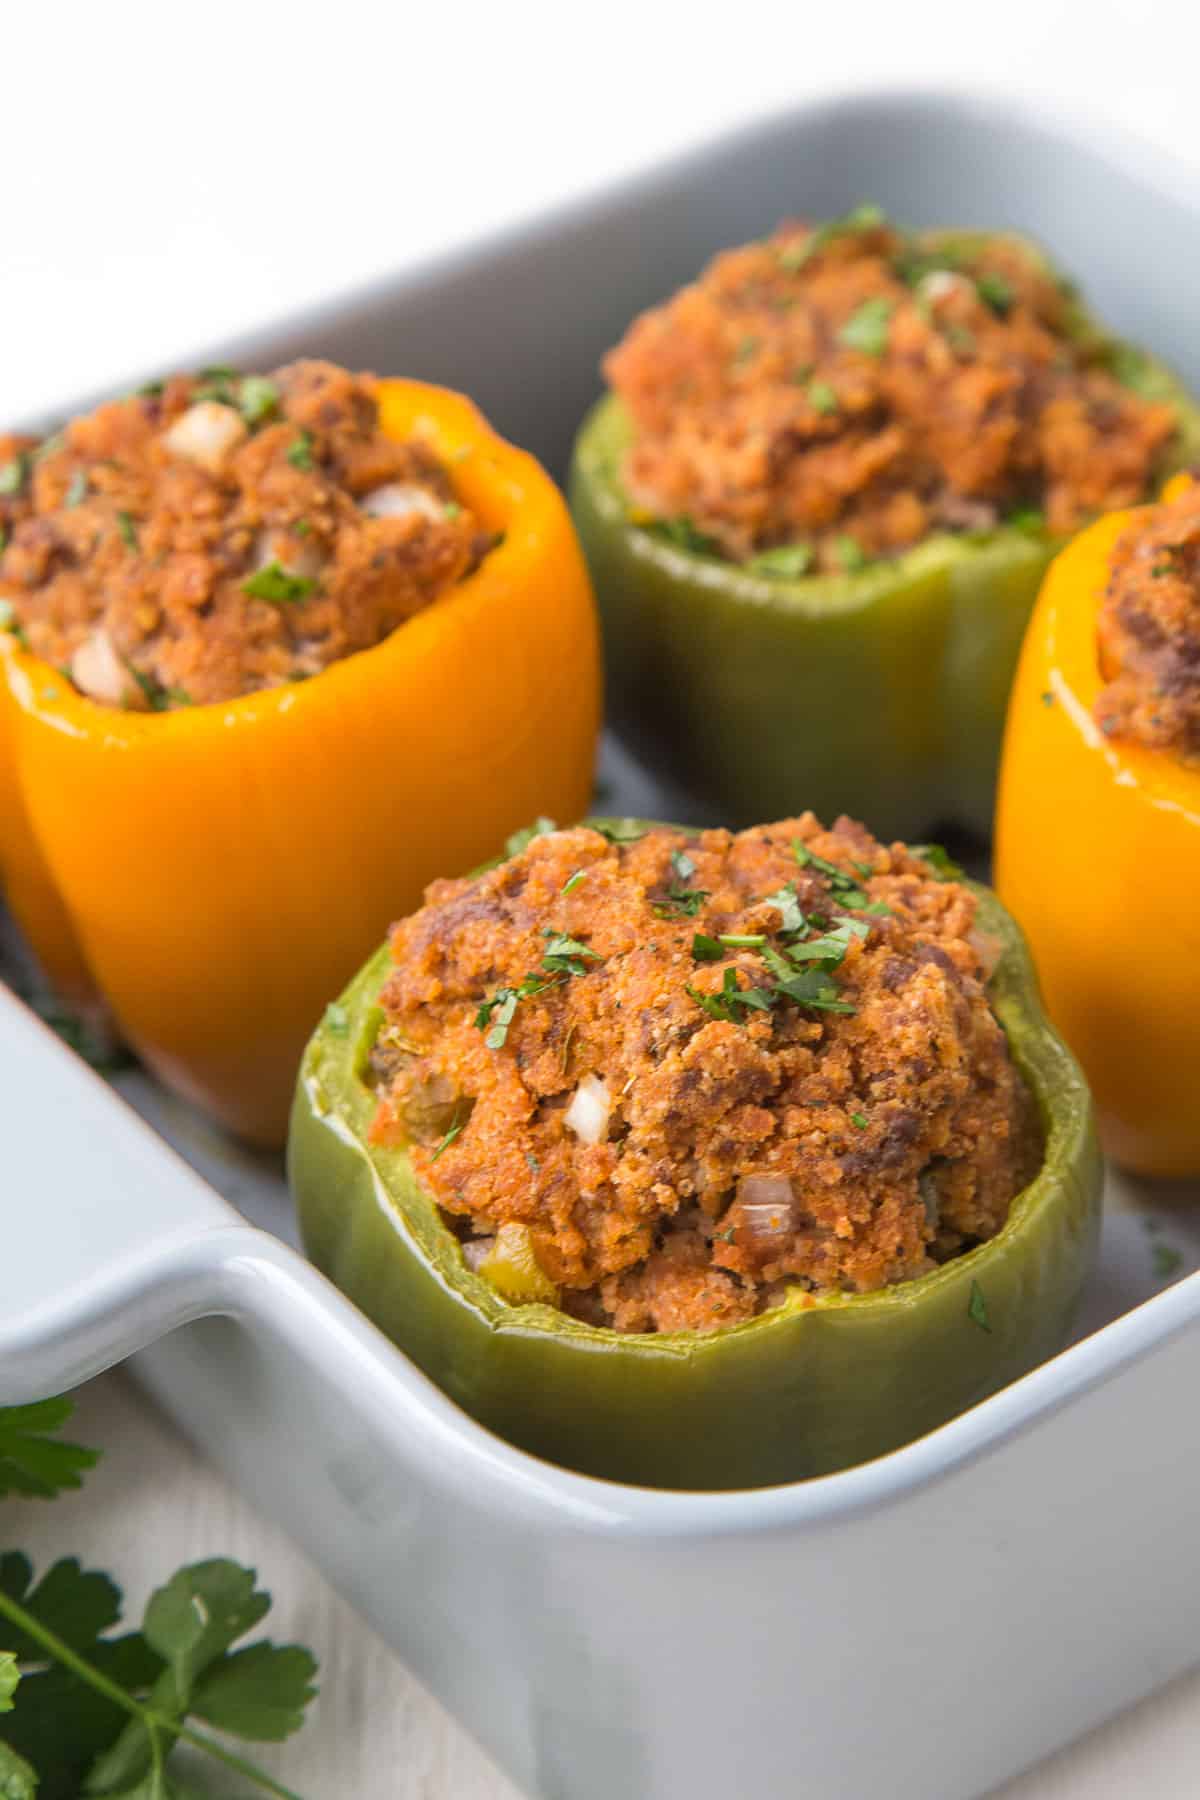 four beef stuffed bell peppers in a gray casserole dish.